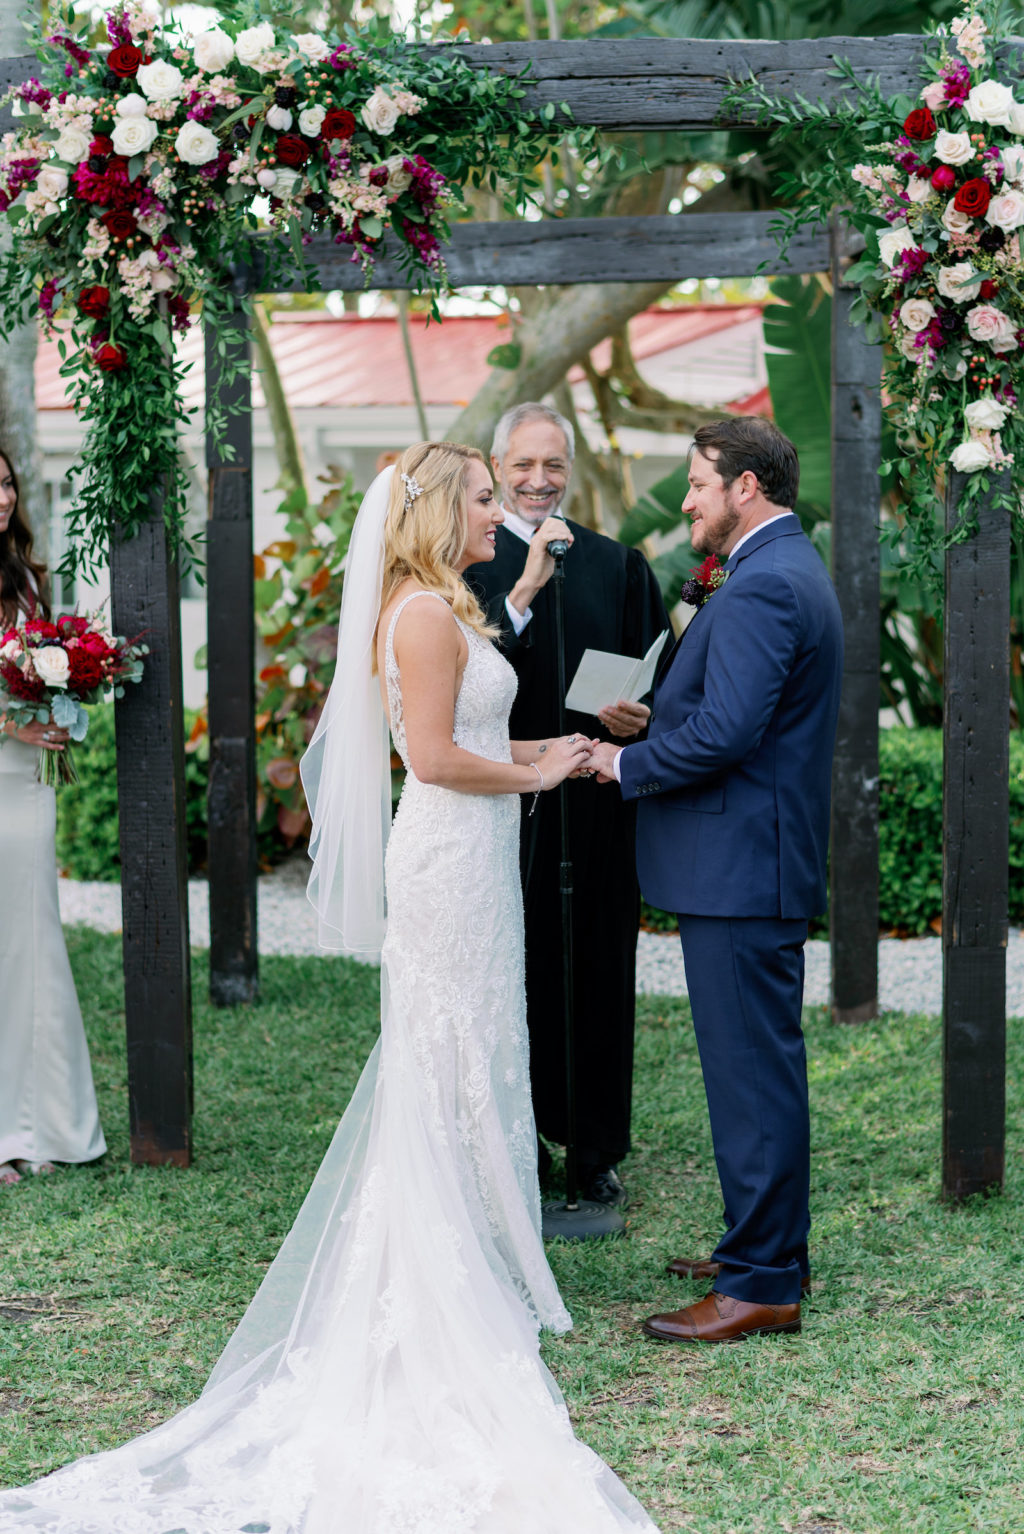 Tampa Bay Bride and Groom Exchanging Wedding Vows During Ceremony | Clearwater Wedding Venue Carlouel Beach and Yacht Club